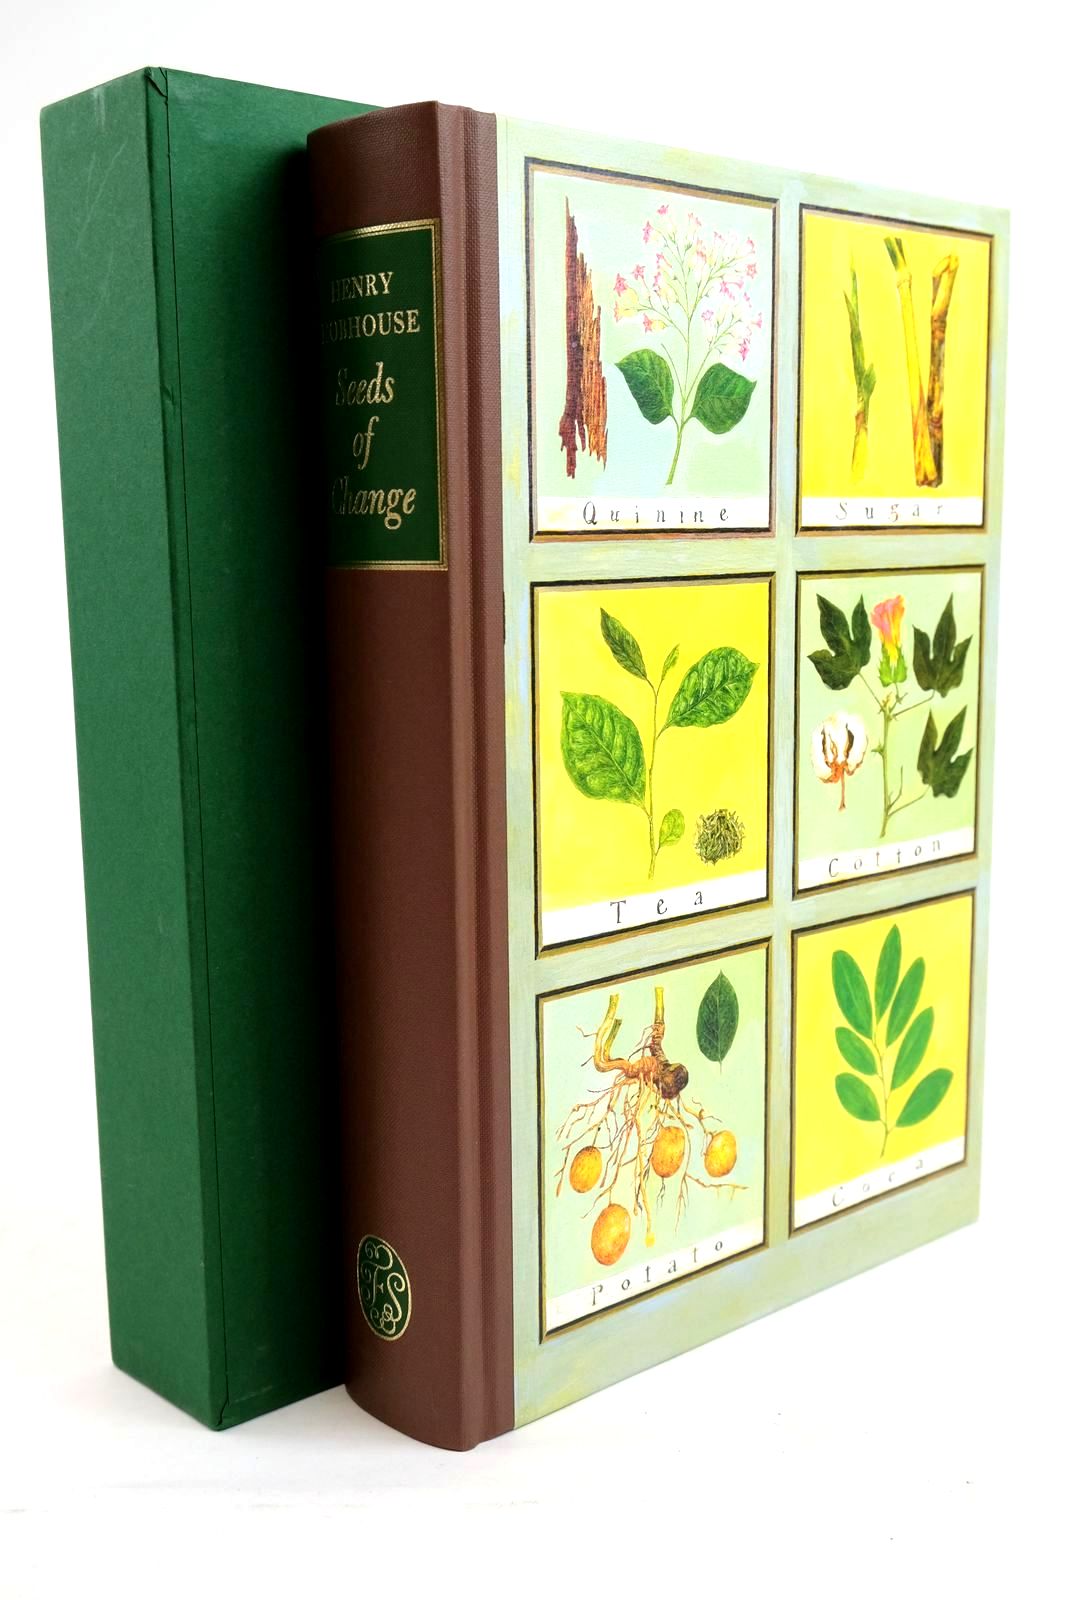 Photo of SEEDS OF CHANGE written by Hobhouse, Henry published by Folio Society (STOCK CODE: 1321549)  for sale by Stella & Rose's Books